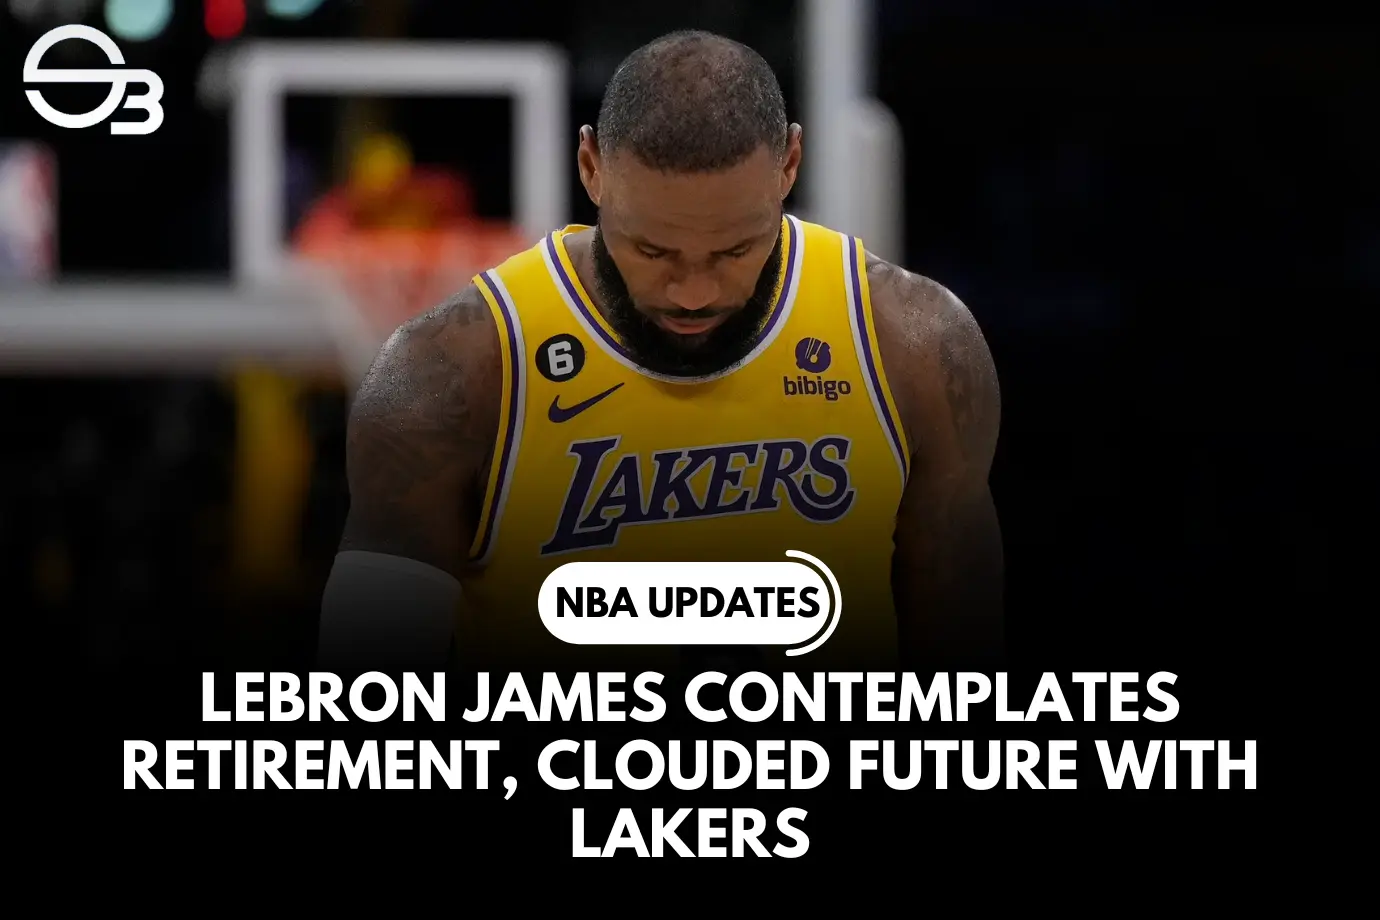 LeBron James Contemplates Retirement, Clouded Future with Lakers